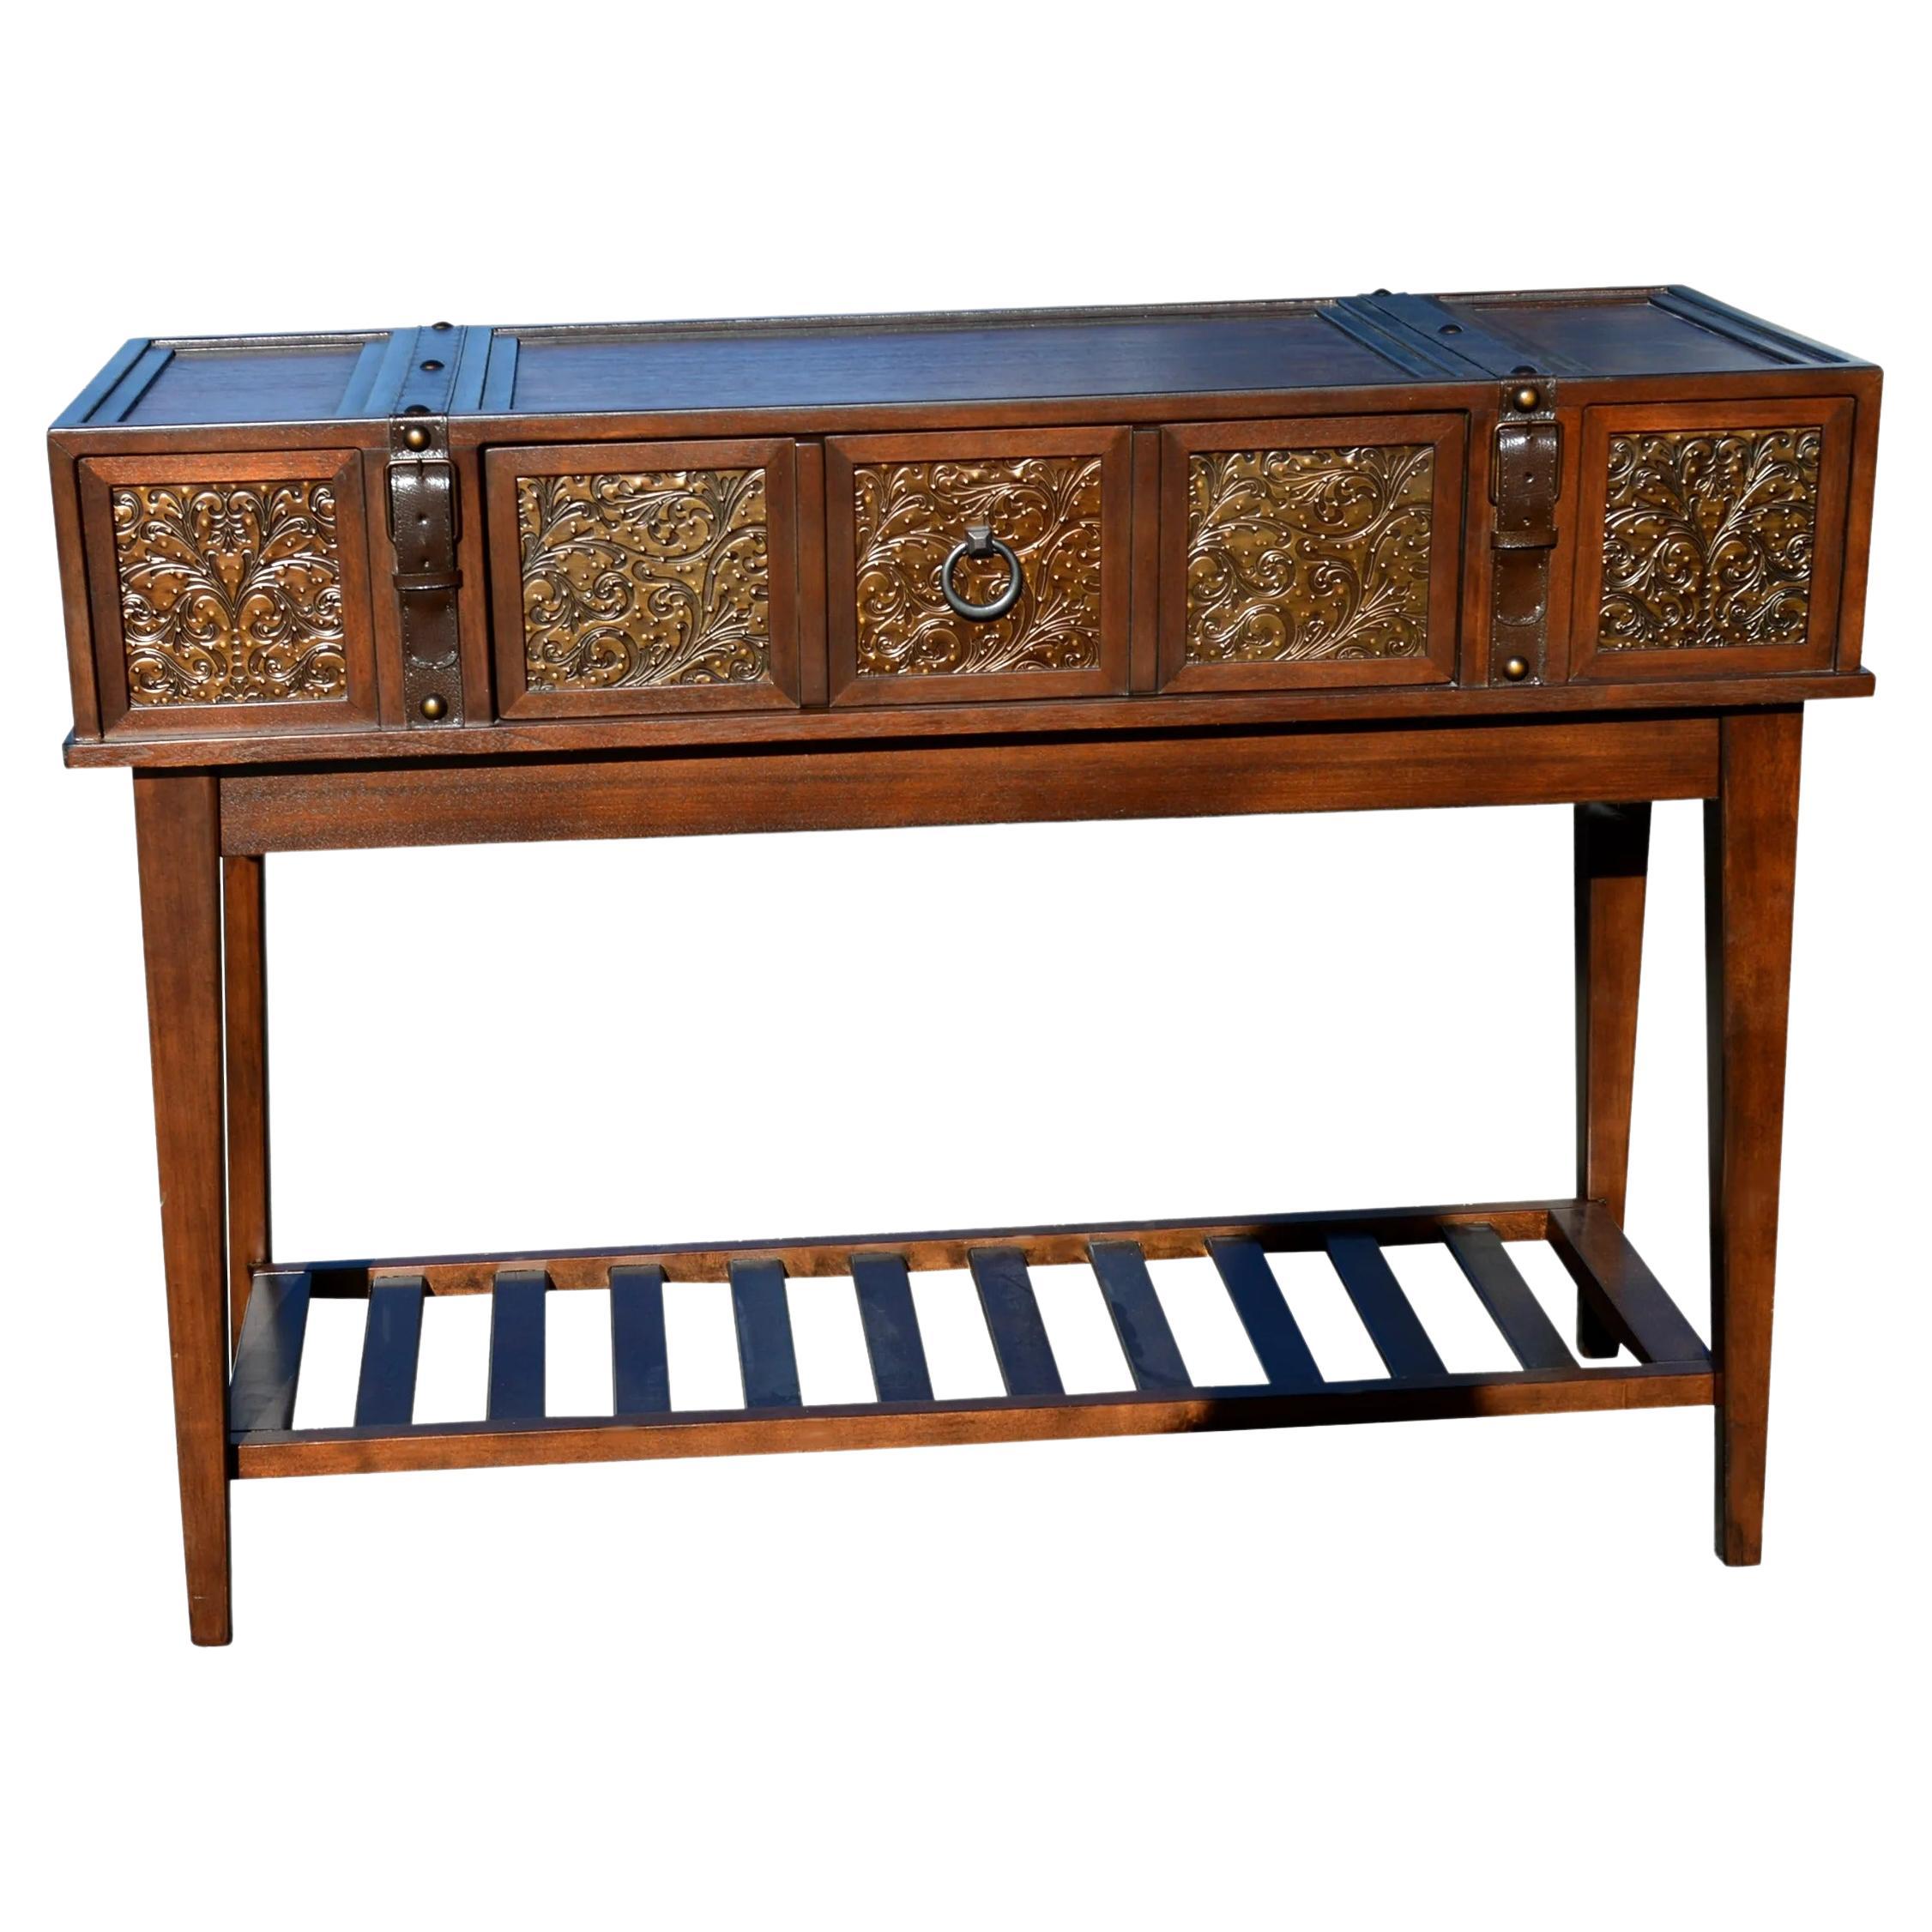 48? console table 

Details including inset stamped metal and buckled belt accents. 

Features:

Vintage Casual style
Solid wood construction
One storage drawer
Buckled belt accents
Functional base shelf.

  